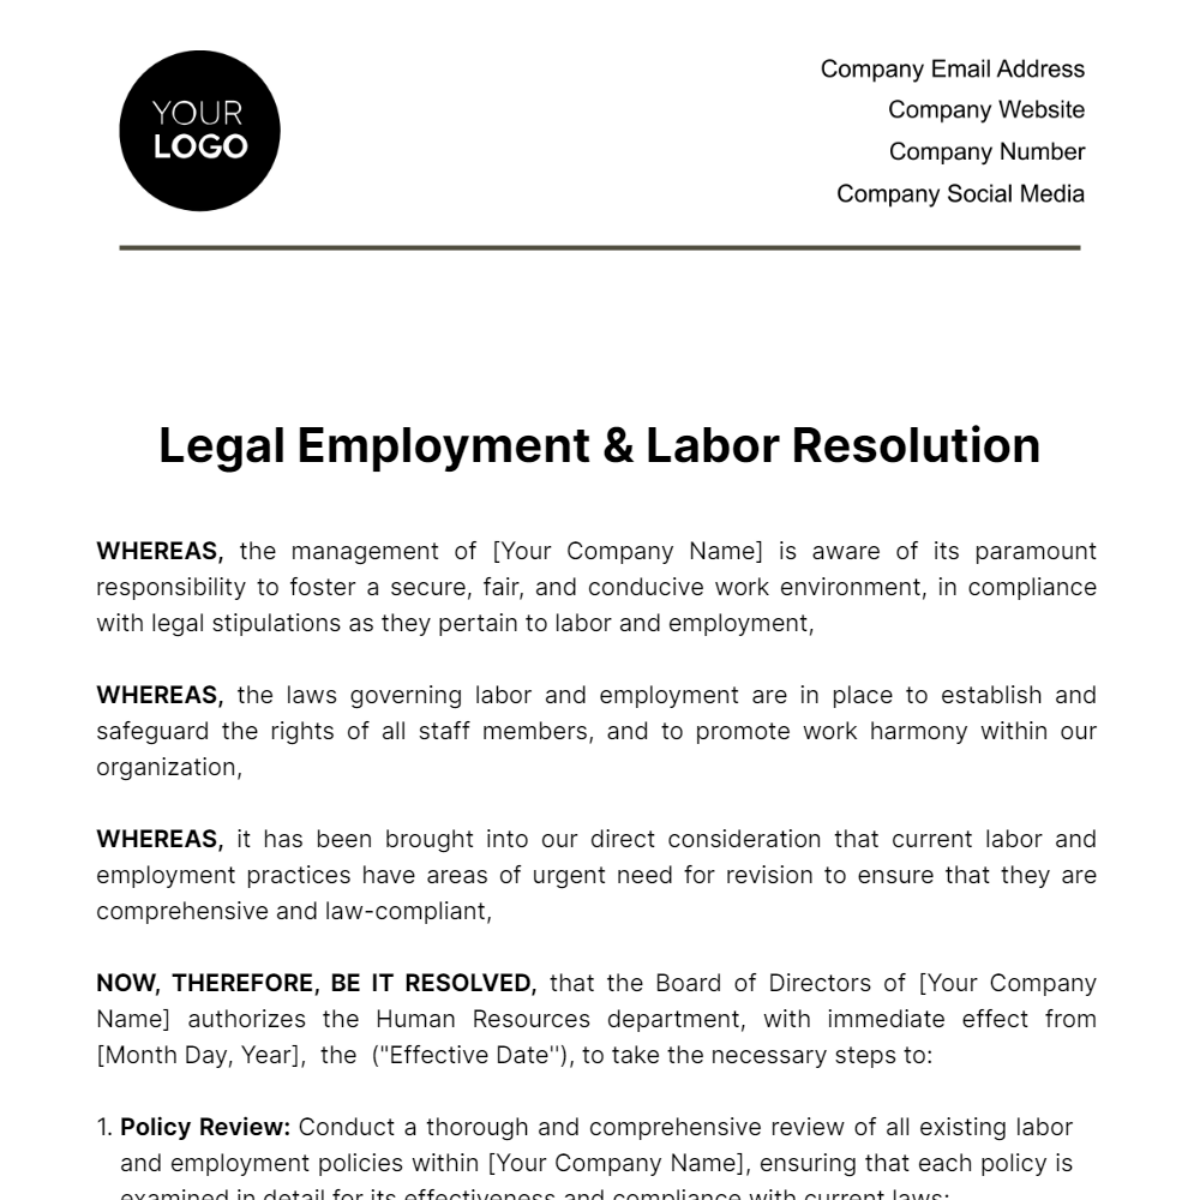 Free Legal Employment & Labor Resolution Template